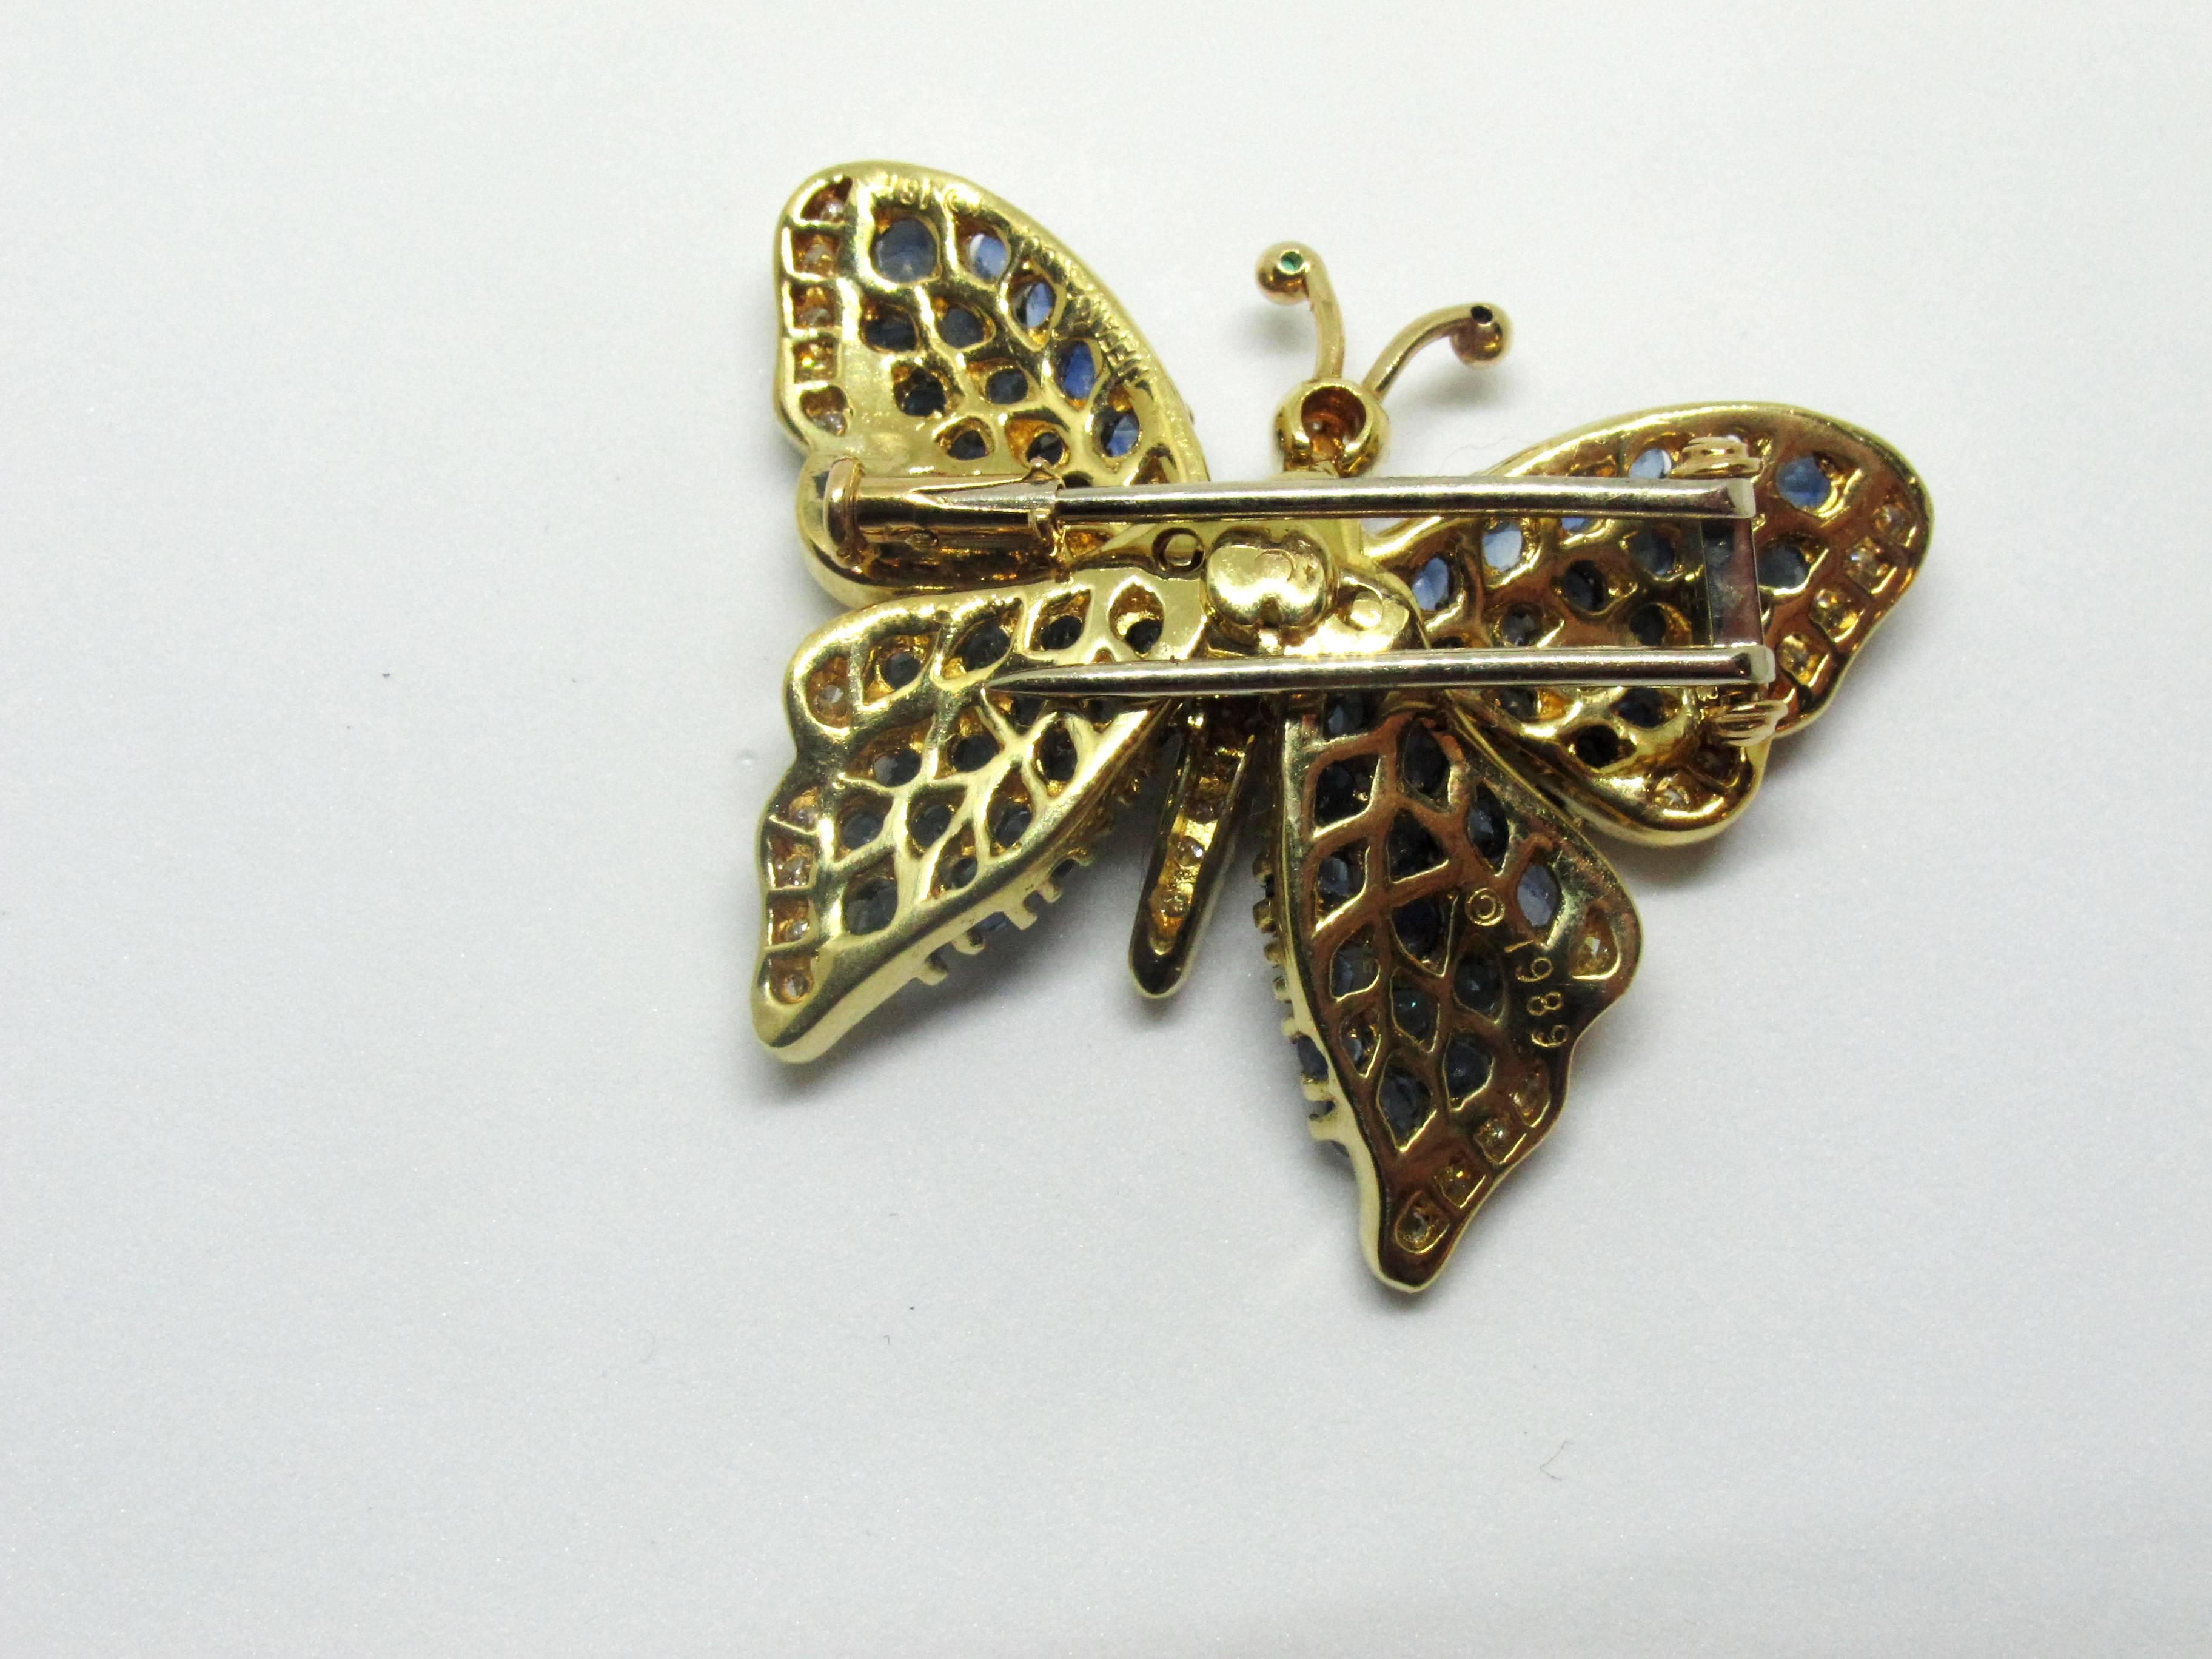 A Tiffany & Co. 18K yellow gold butterfly pin set with diamonds and blue sapphires. The reverse stamped Tiffany & Co 1989.